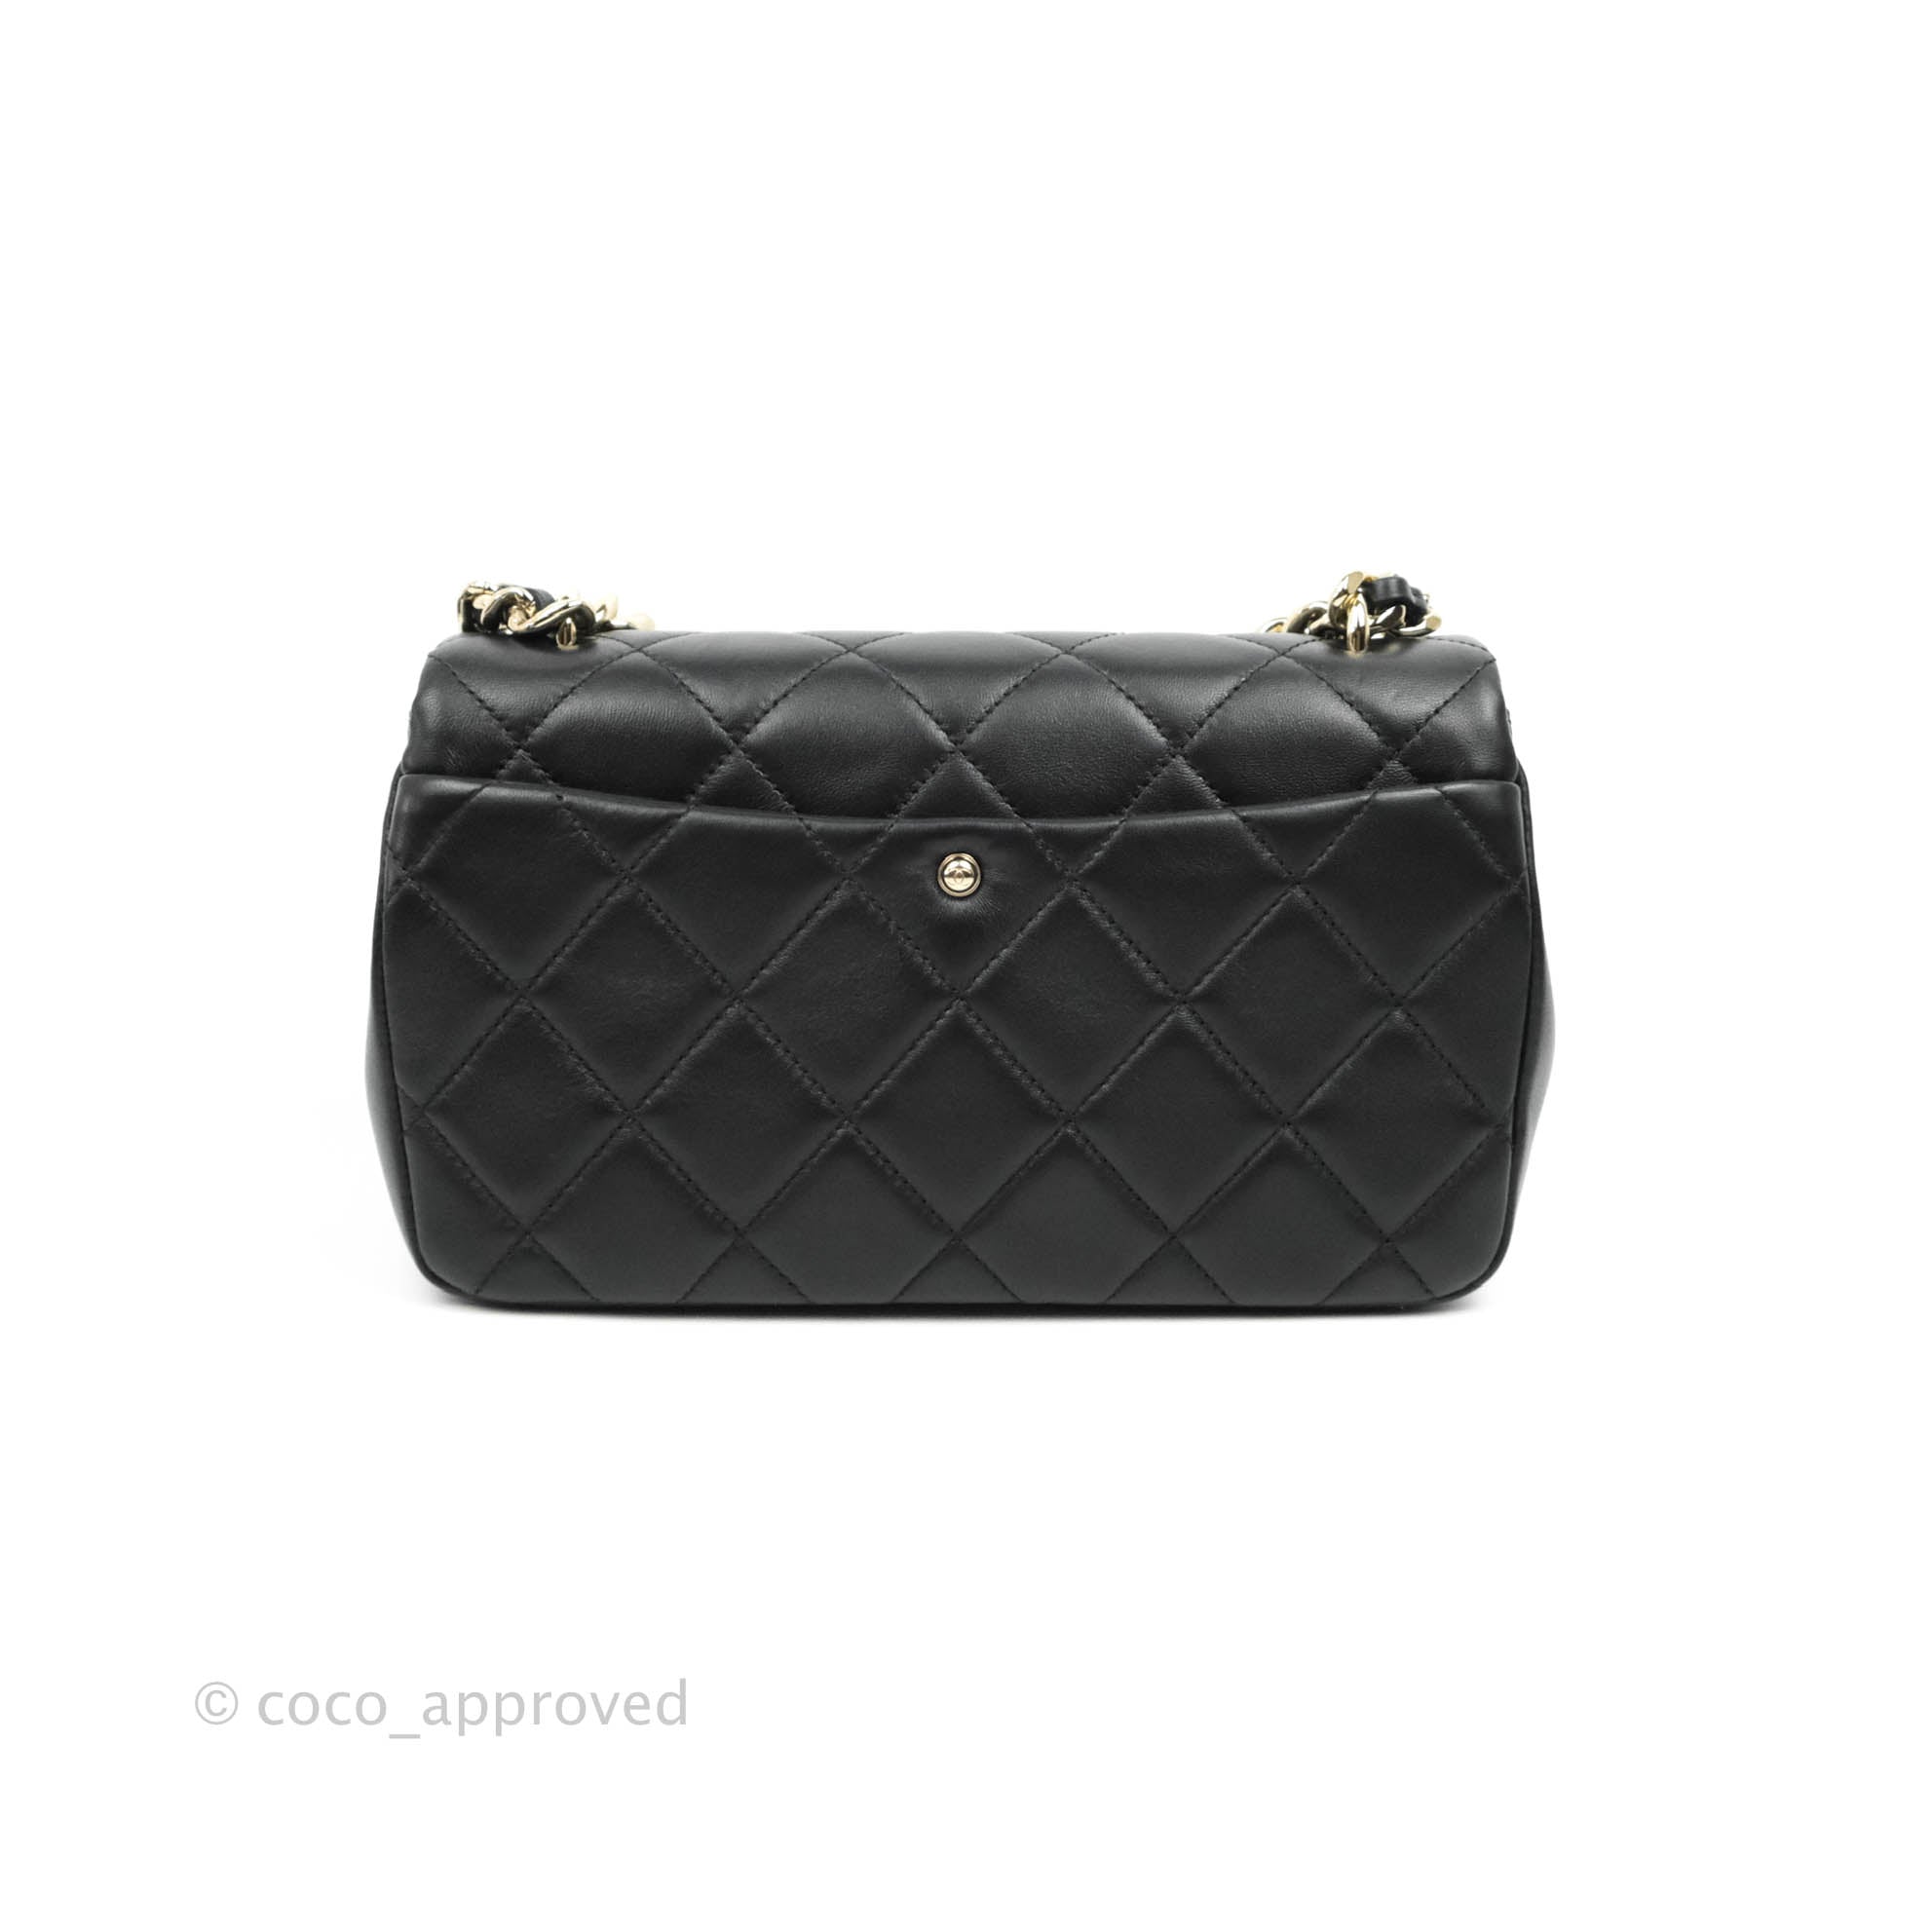 Chanel Large Flap Bag With Bi-Color Top Handle